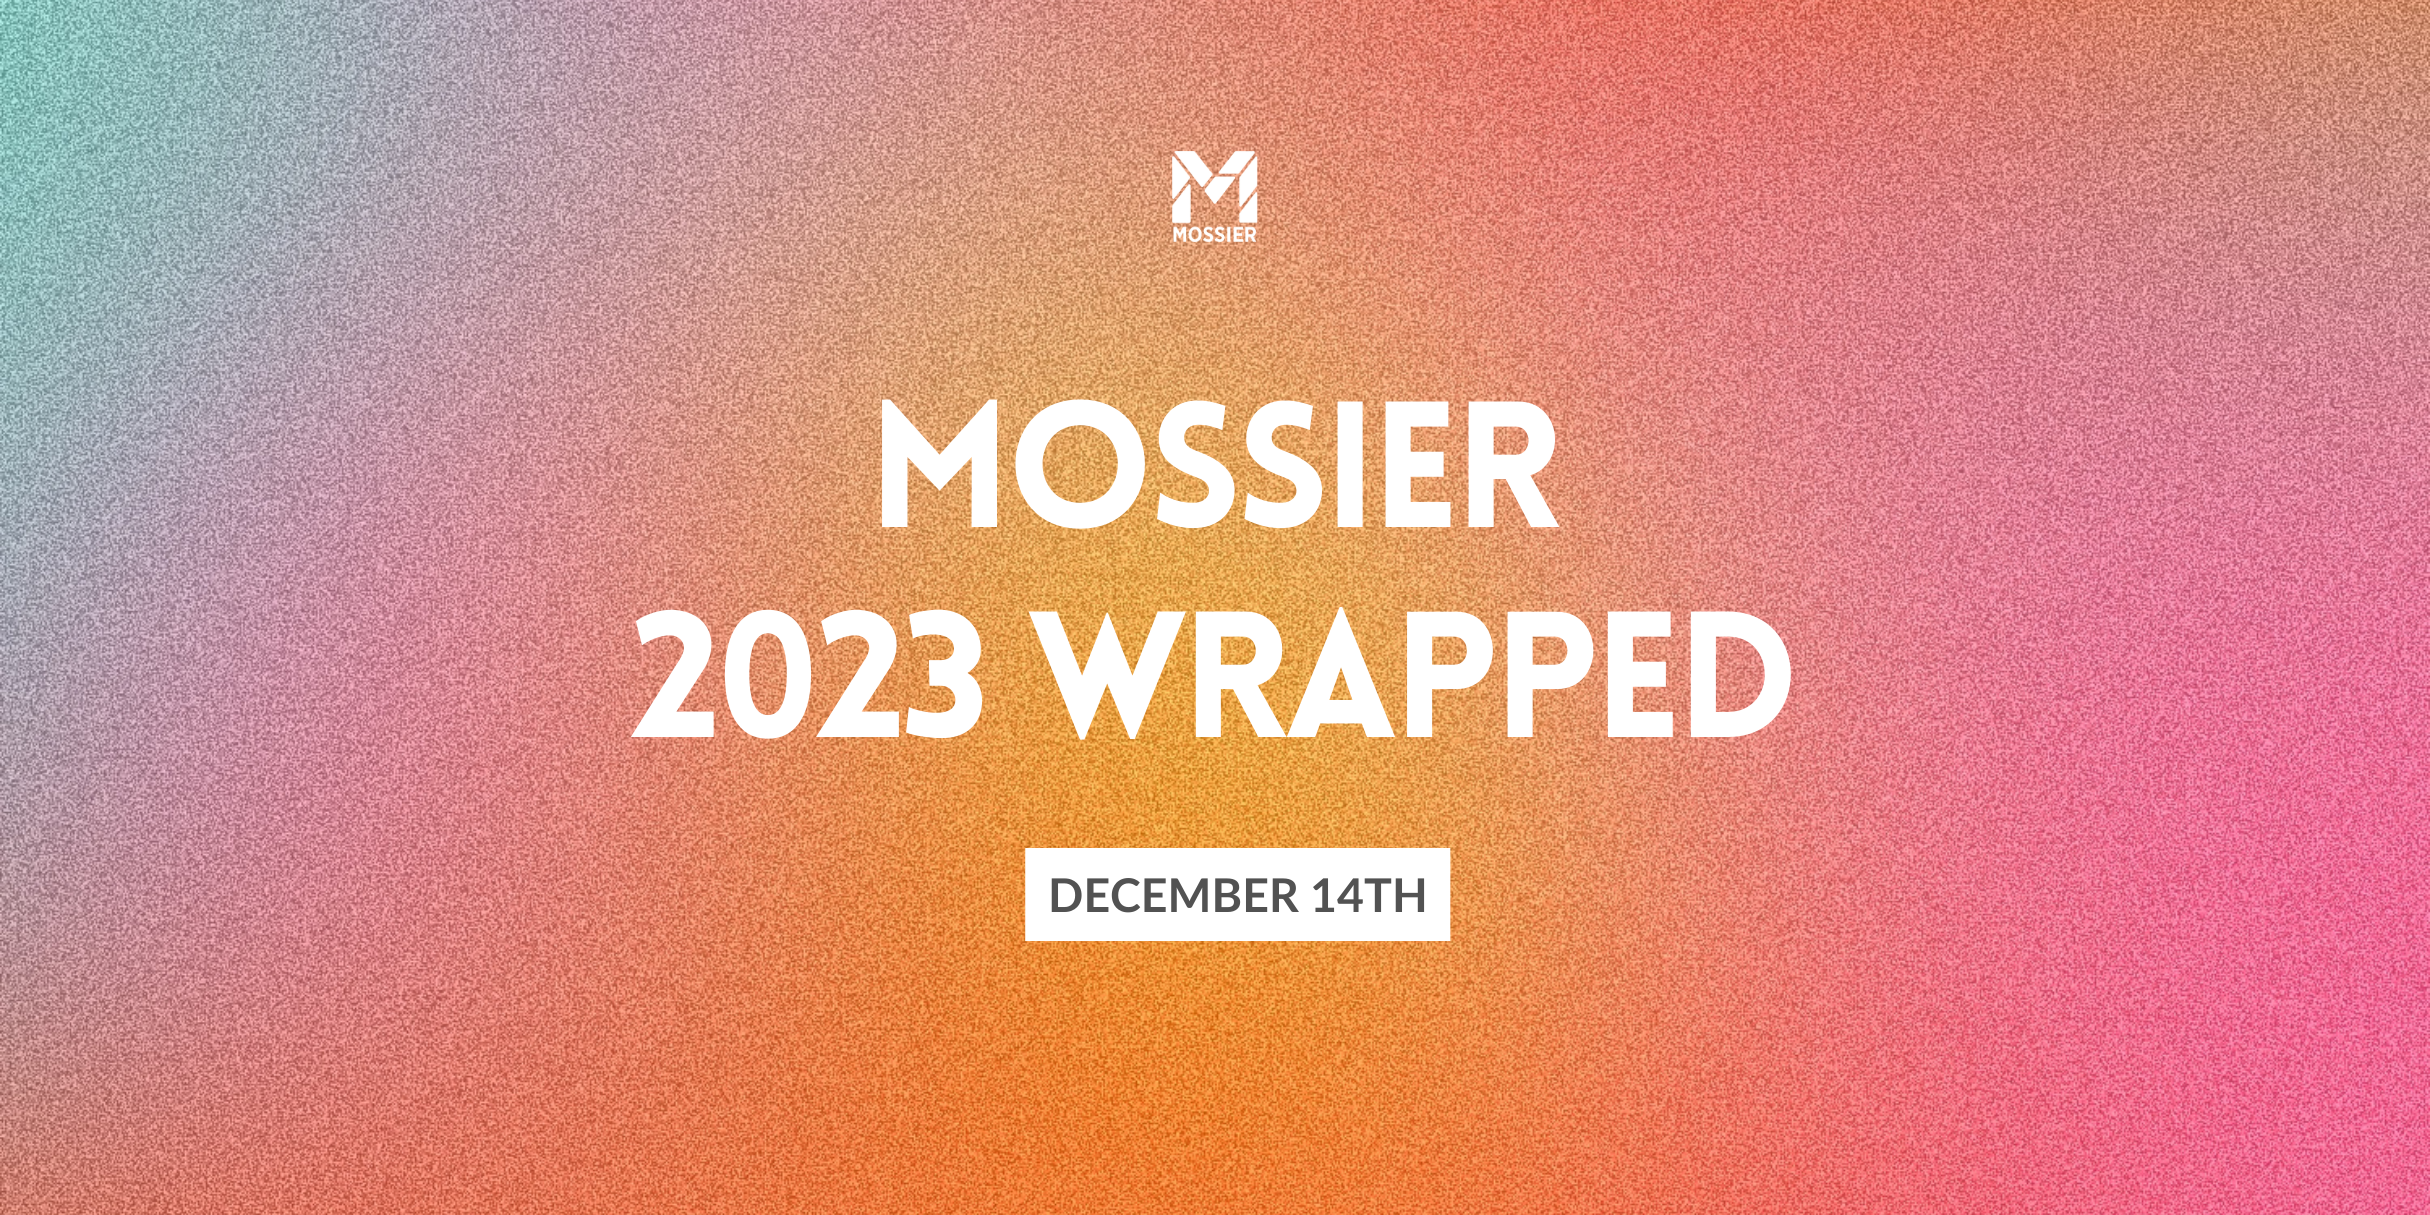 Mossier 2023 Wrapped